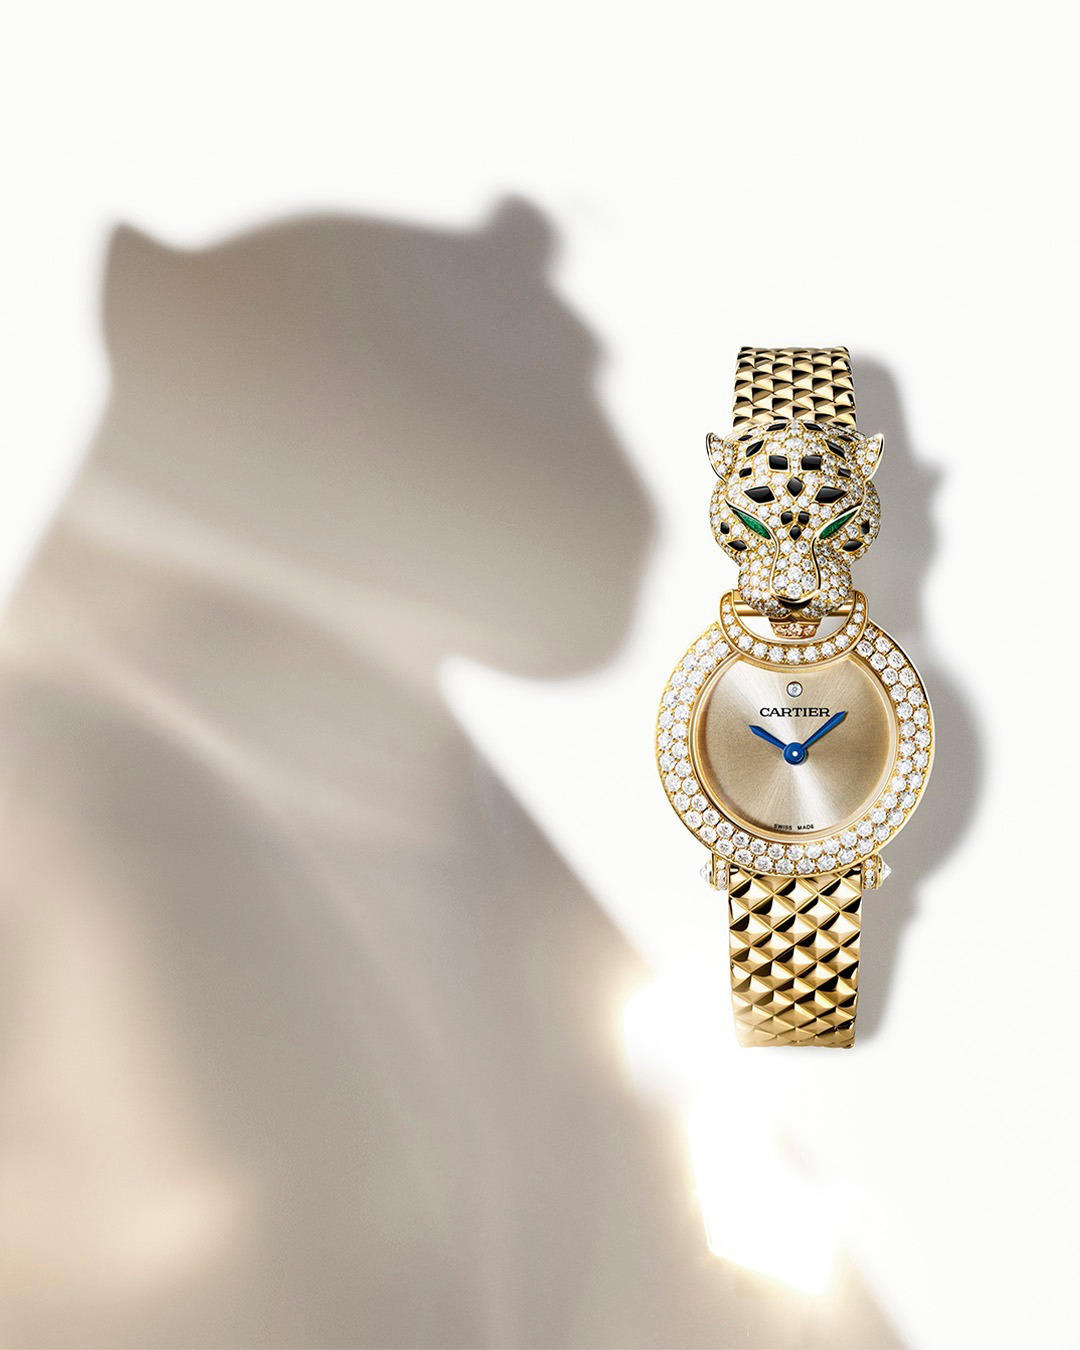 Cartier Official - Where jewelry and watchmaking savoir-faire meet, the Panthère encapsulates the Ma